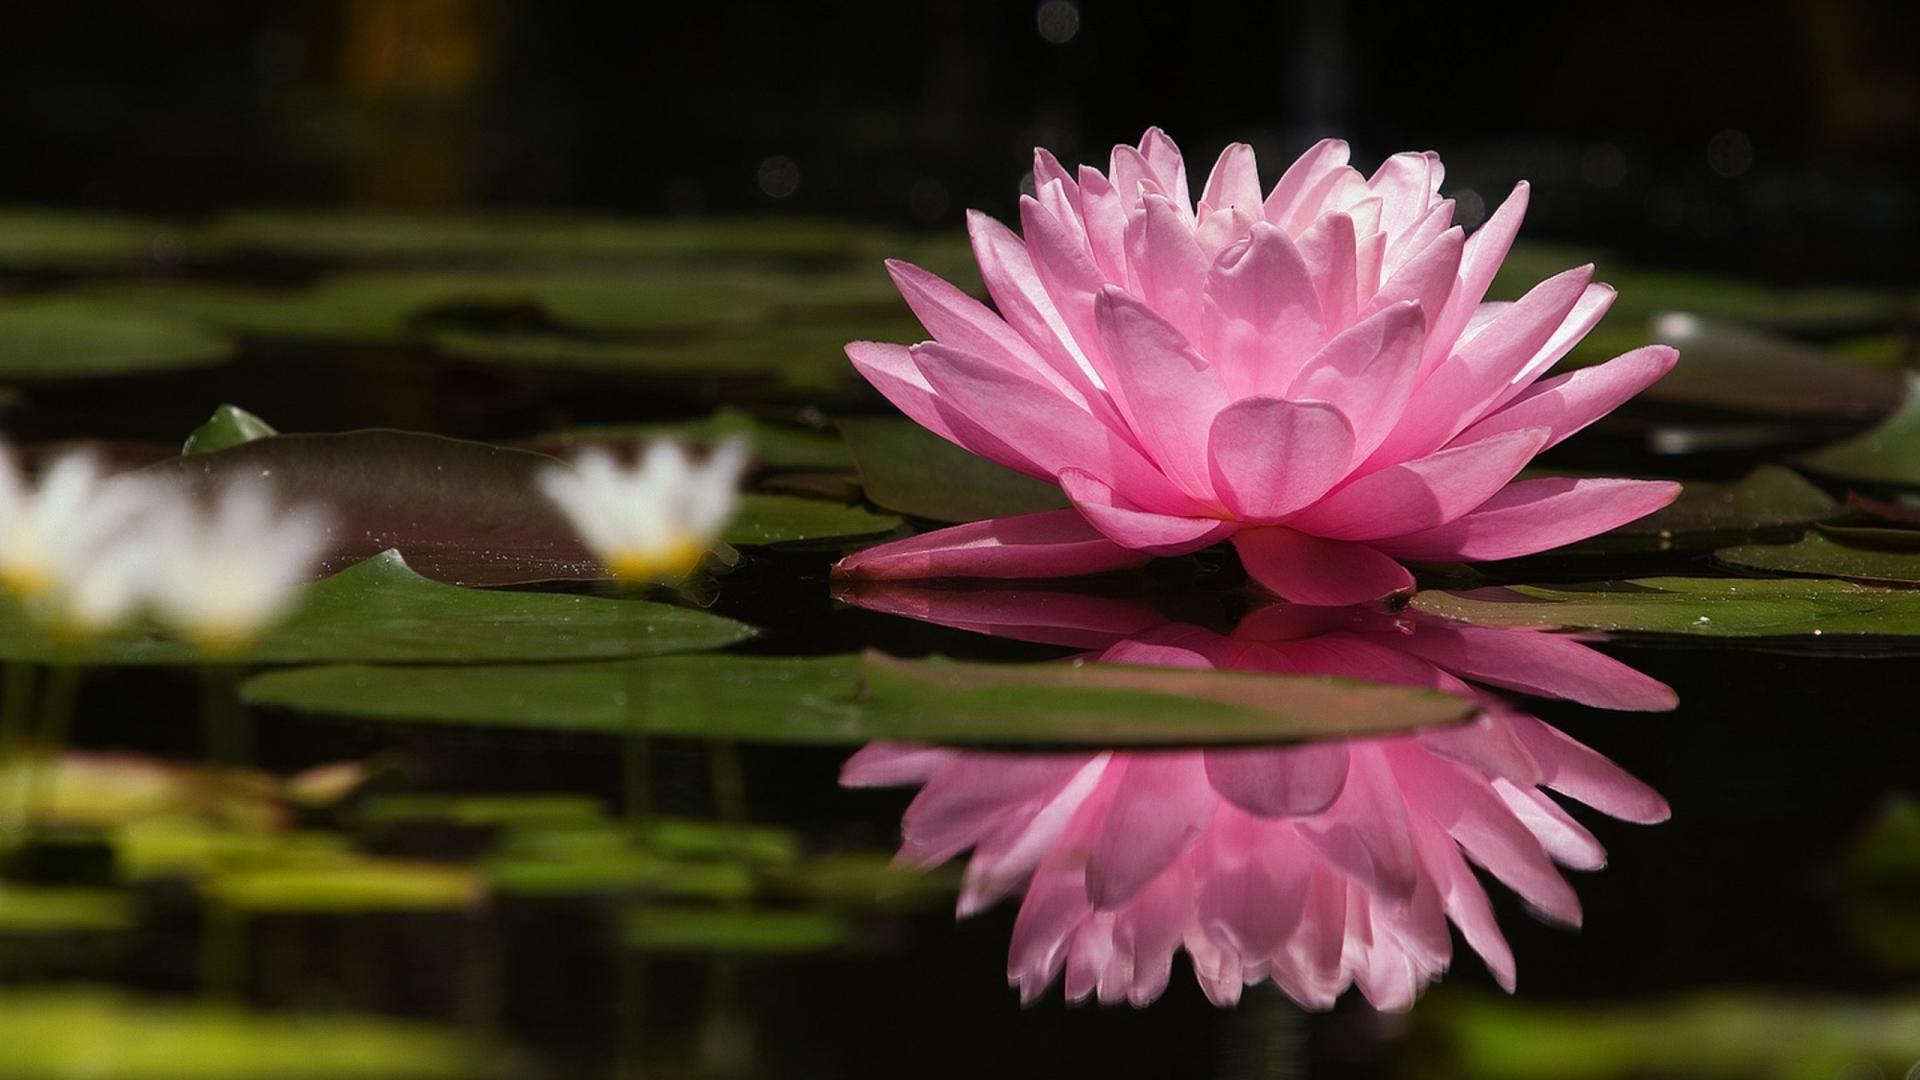 Lily pads water lilies reflections pink flowers wallpaper